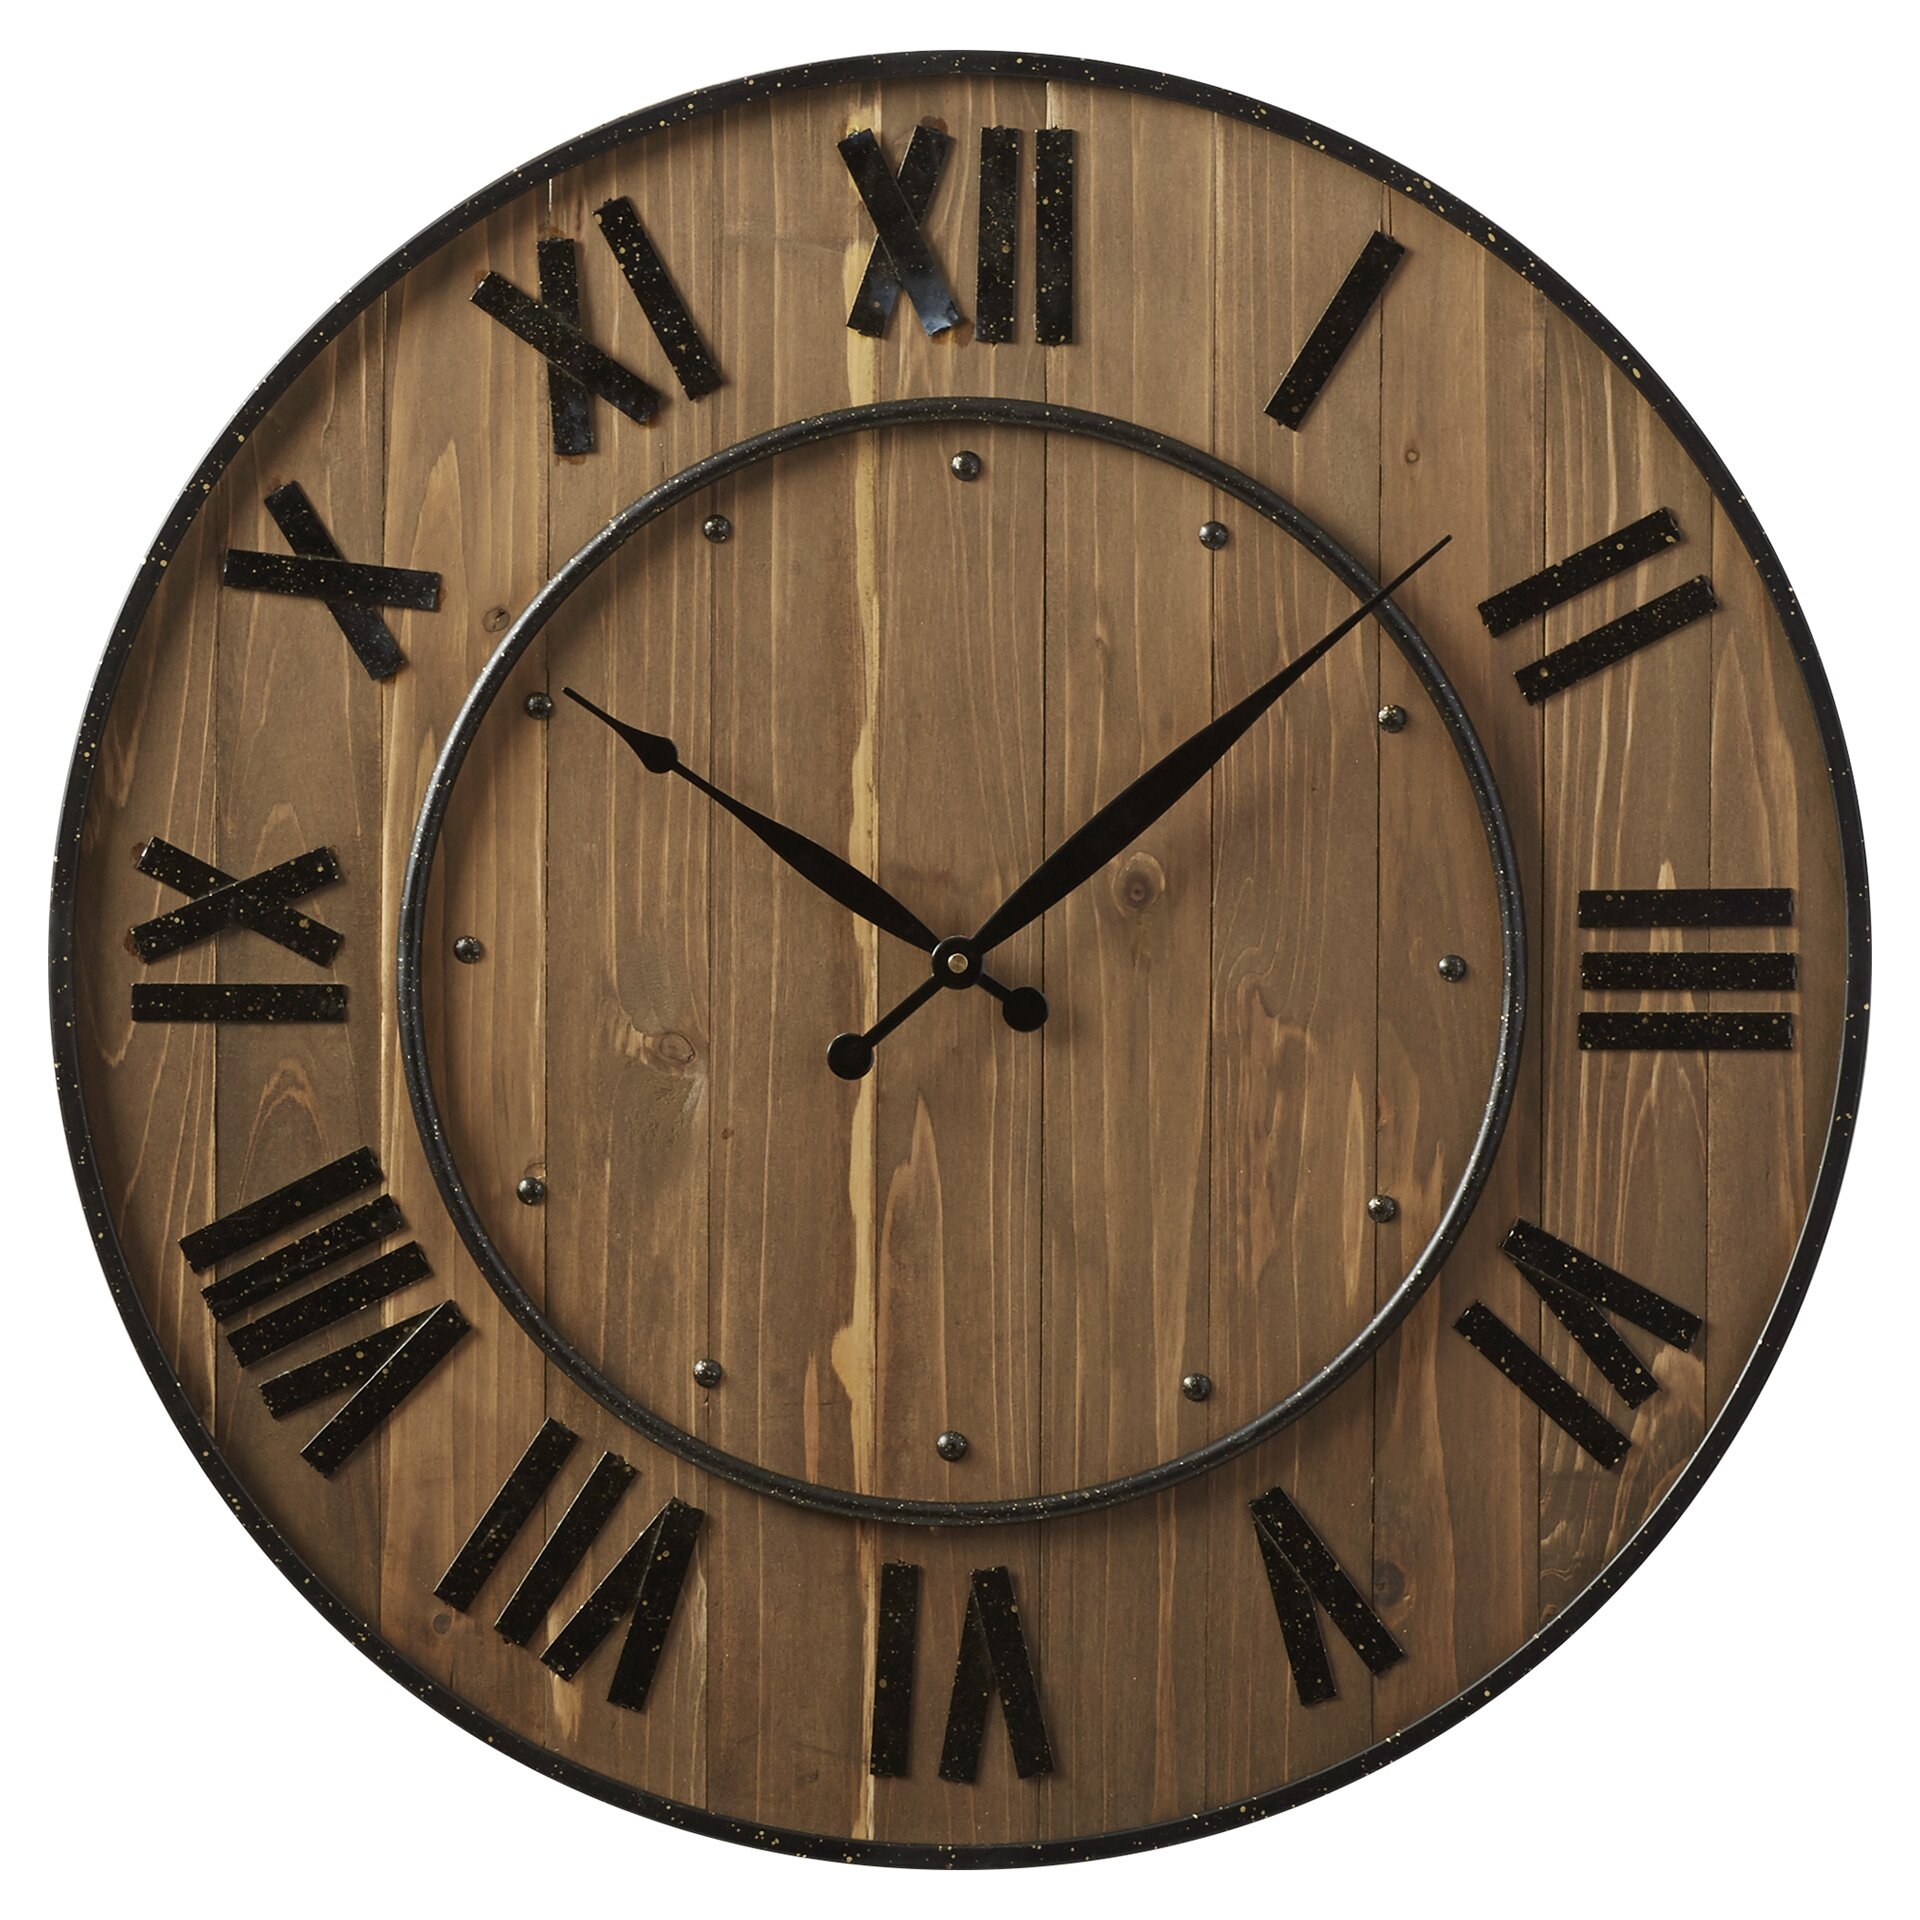 Wooden Round Wall Clock Arabic Numerals is That A Up Ahead Wall Clock for on 